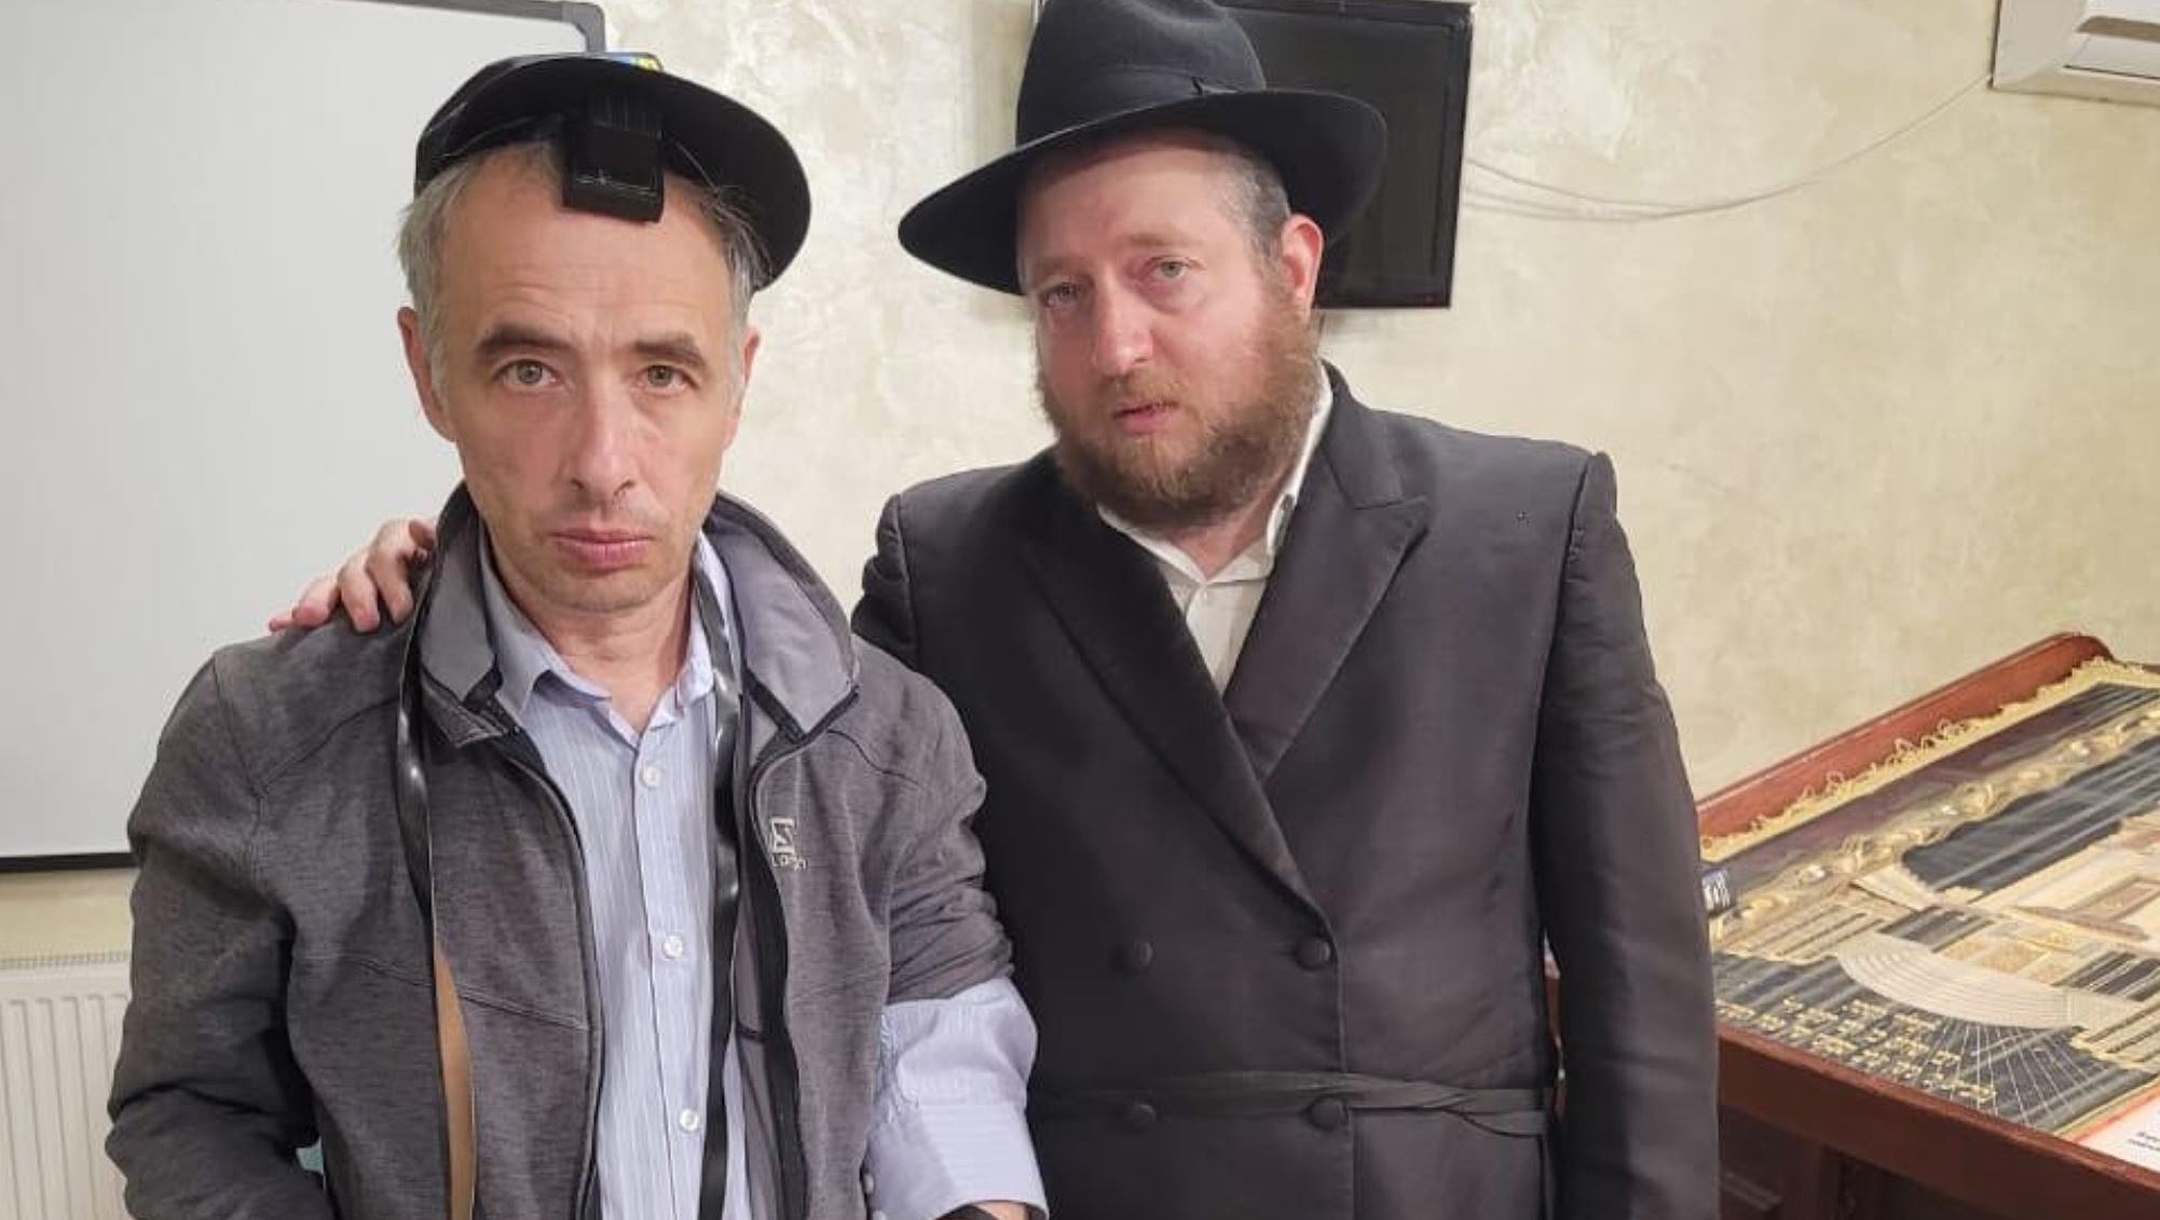 Rabbi Shaul Horowitz, right, meets a Jewish refugee attending service at the synagogue of Vinnytsia, Ukraine in June 2022. (Courtesy of Shaul Horowitz)